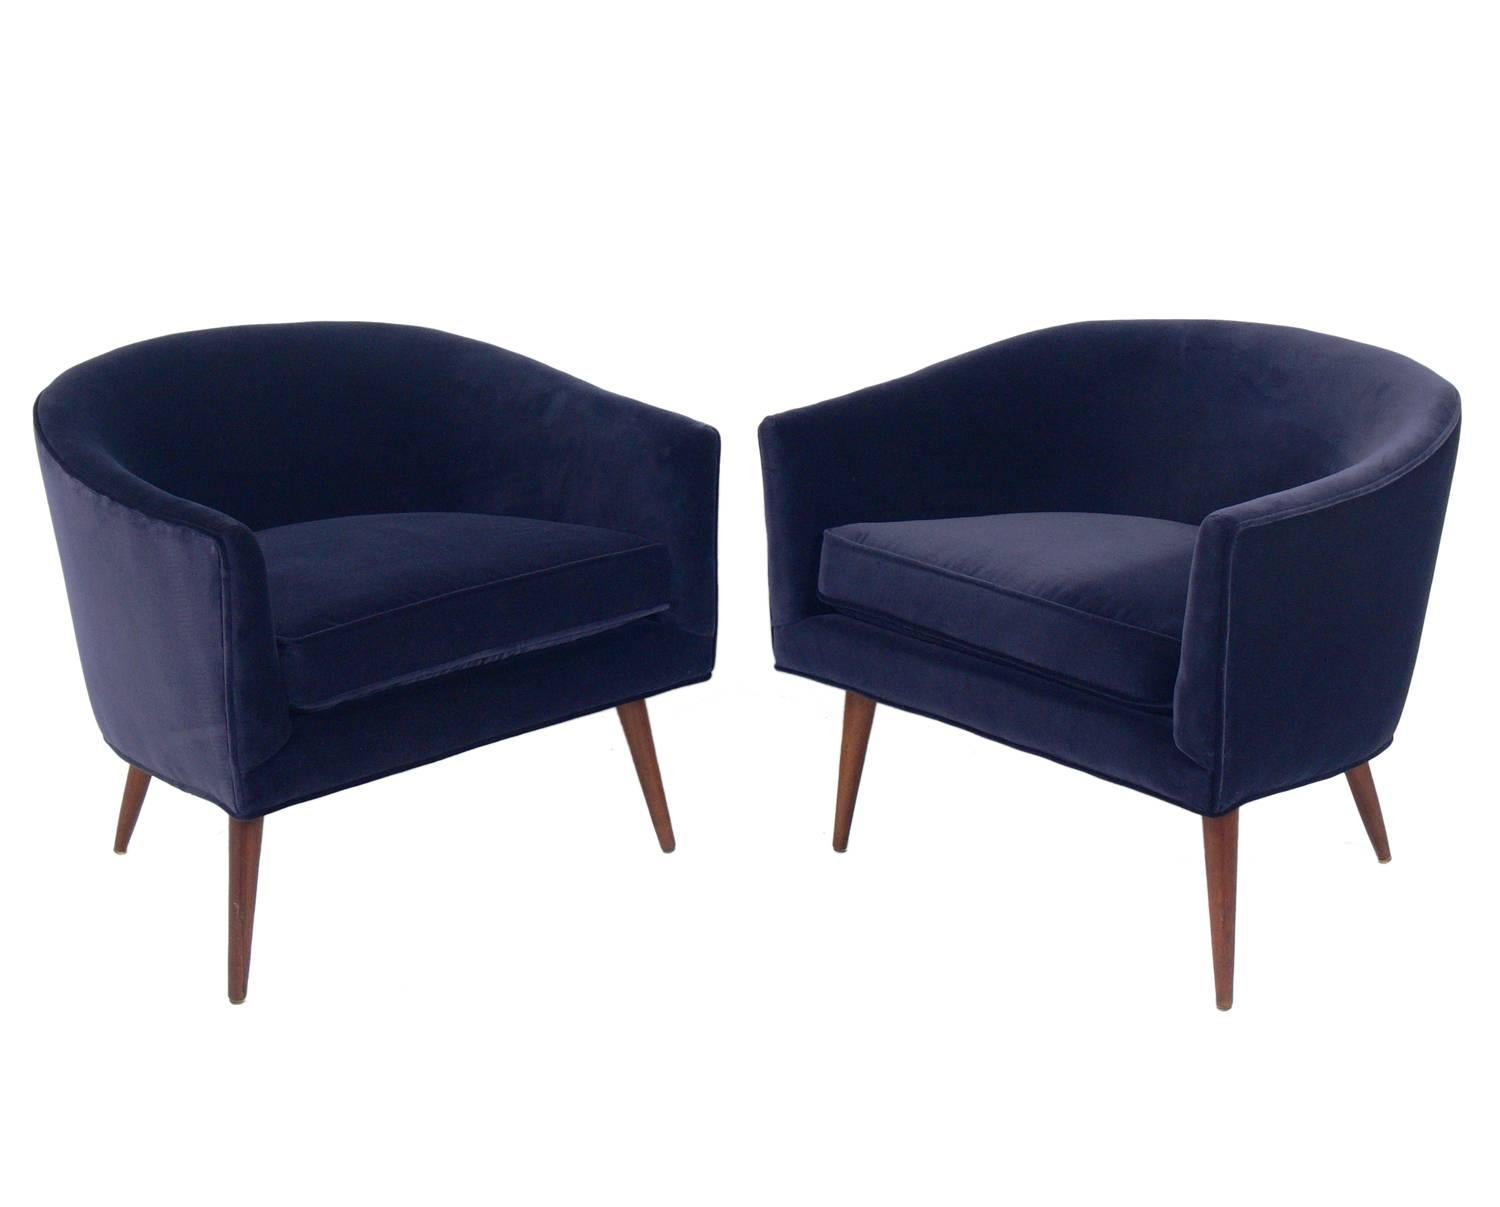 Pair of Curvaceous midcentury lounge chairs, attributed to Adrian Pearsall, American, circa 1960s. They have been reupholstered in a velvety blue fabric and the walnut legs have been cleaned and Danish oiled.